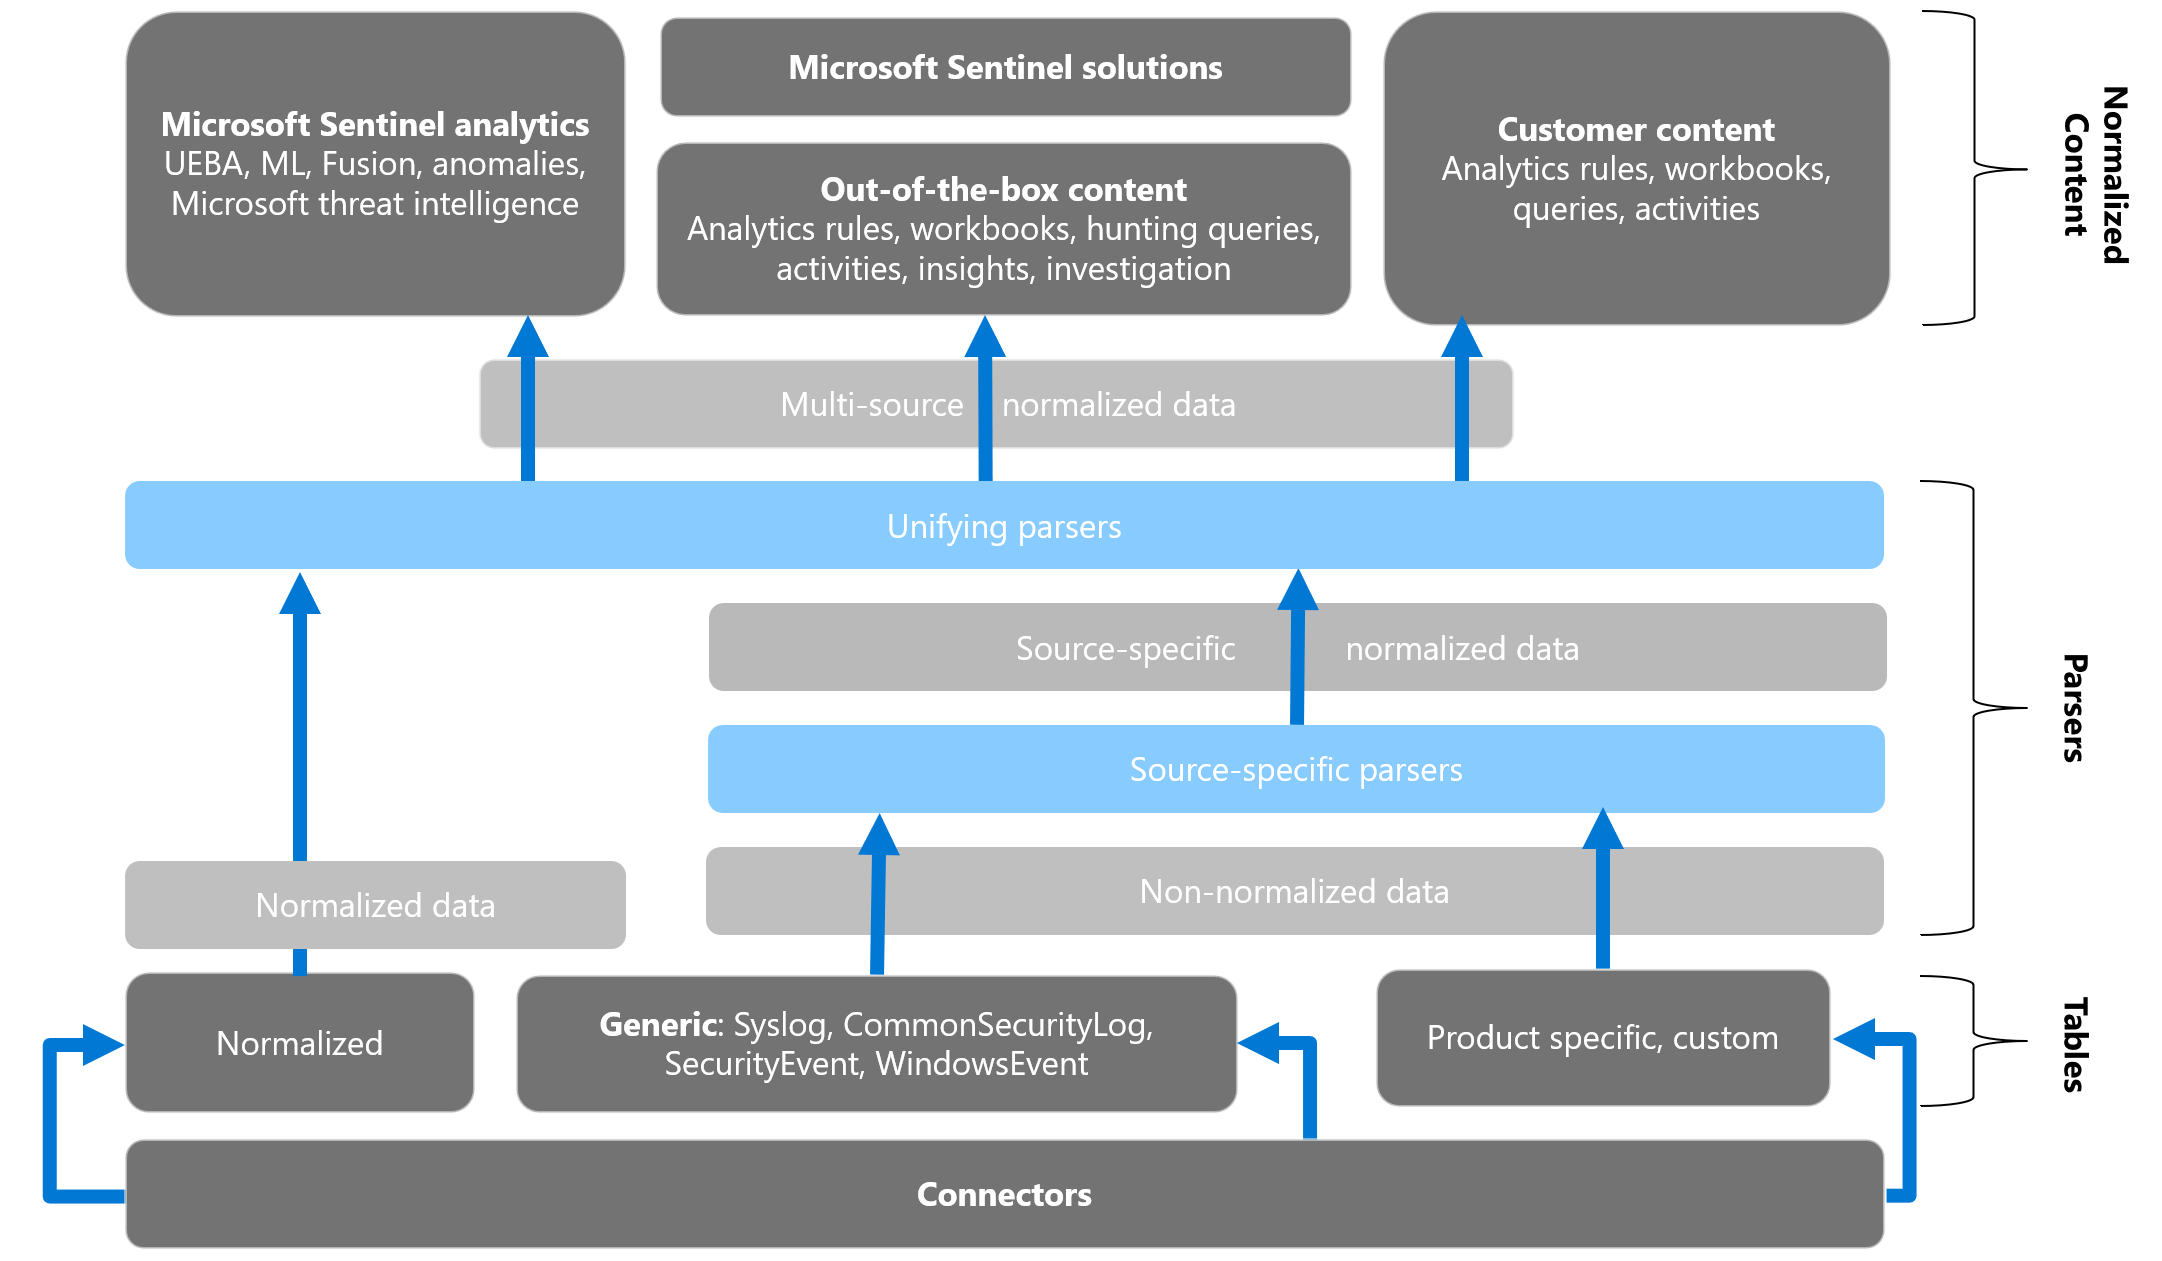 Non-normalized to normalized data conversion flow and usage in Microsoft Sentinel